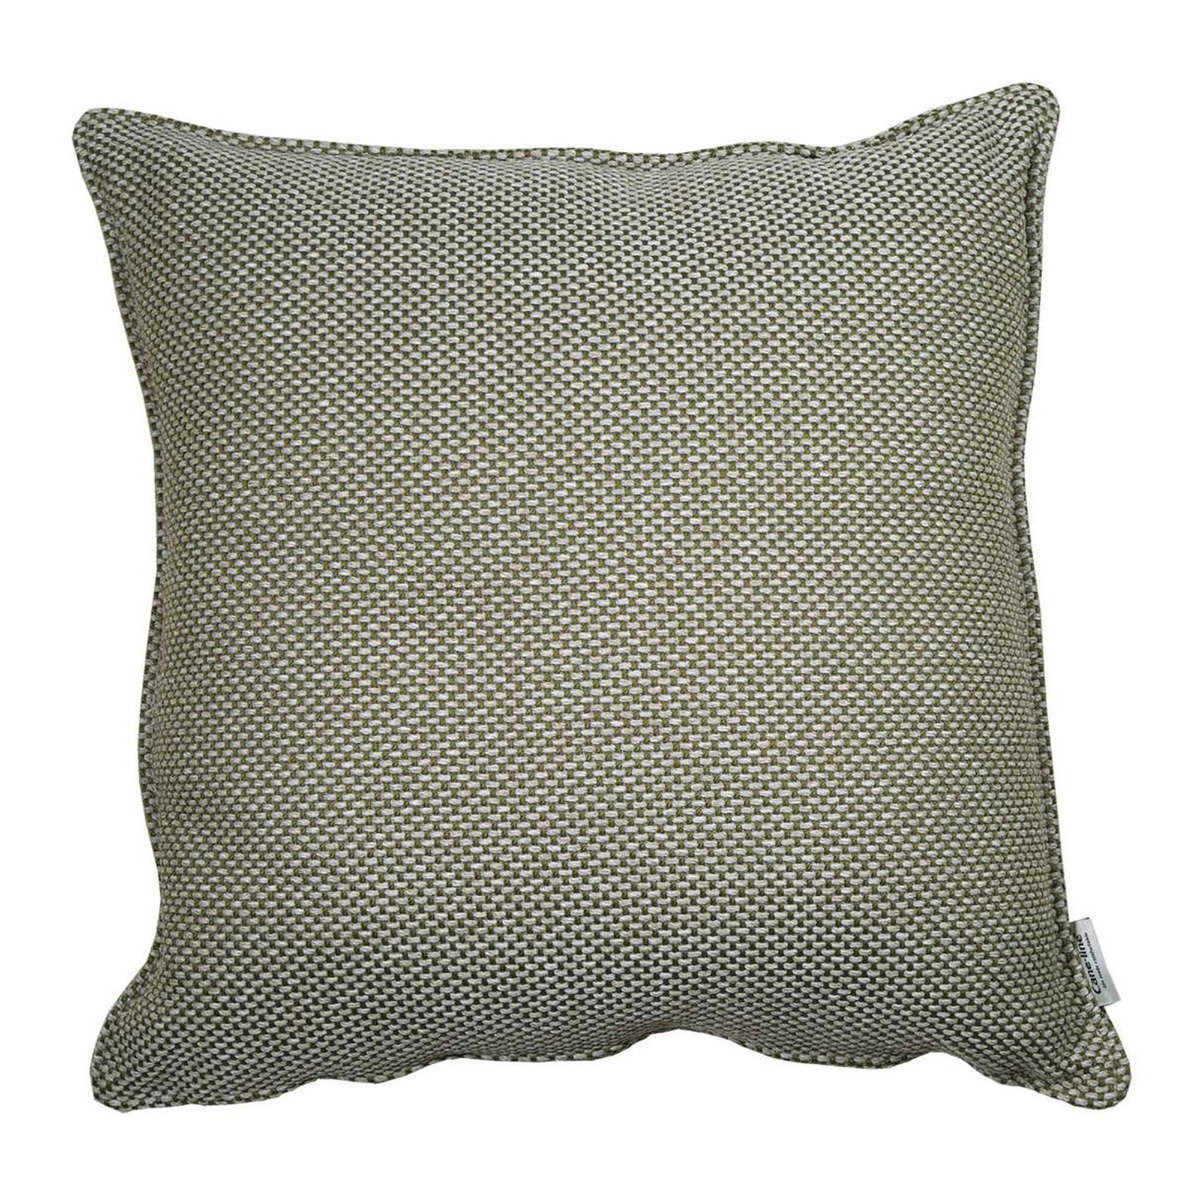 Cane Line Focus Scatter Cushion 50x50x12cm, Square, Green | Barker & Stonehouse